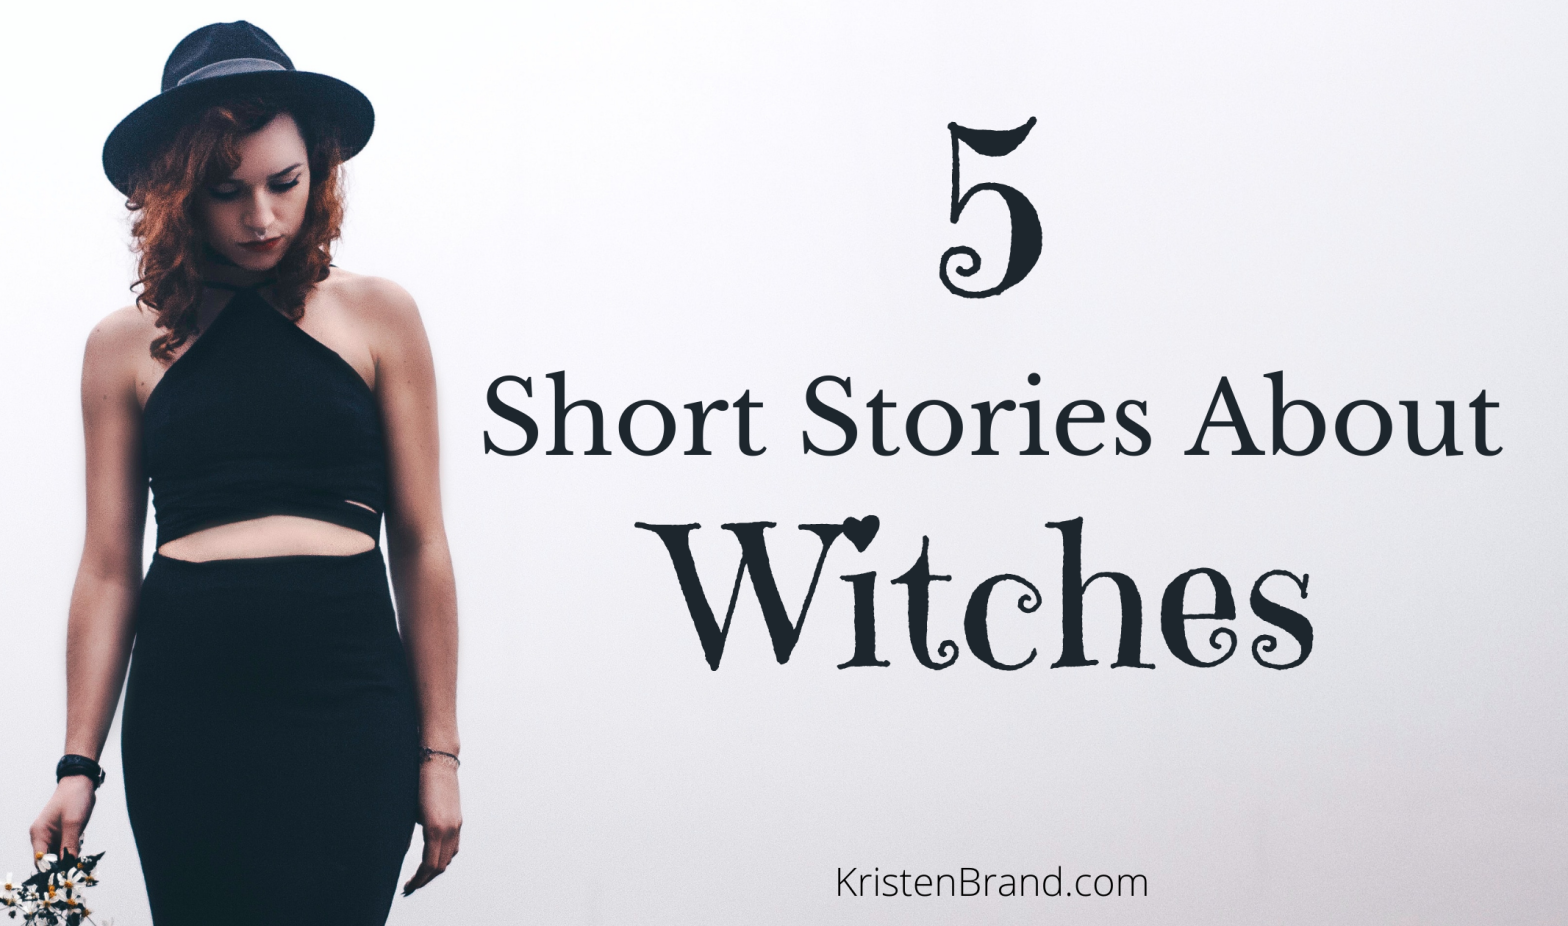 Short Stories About Witches